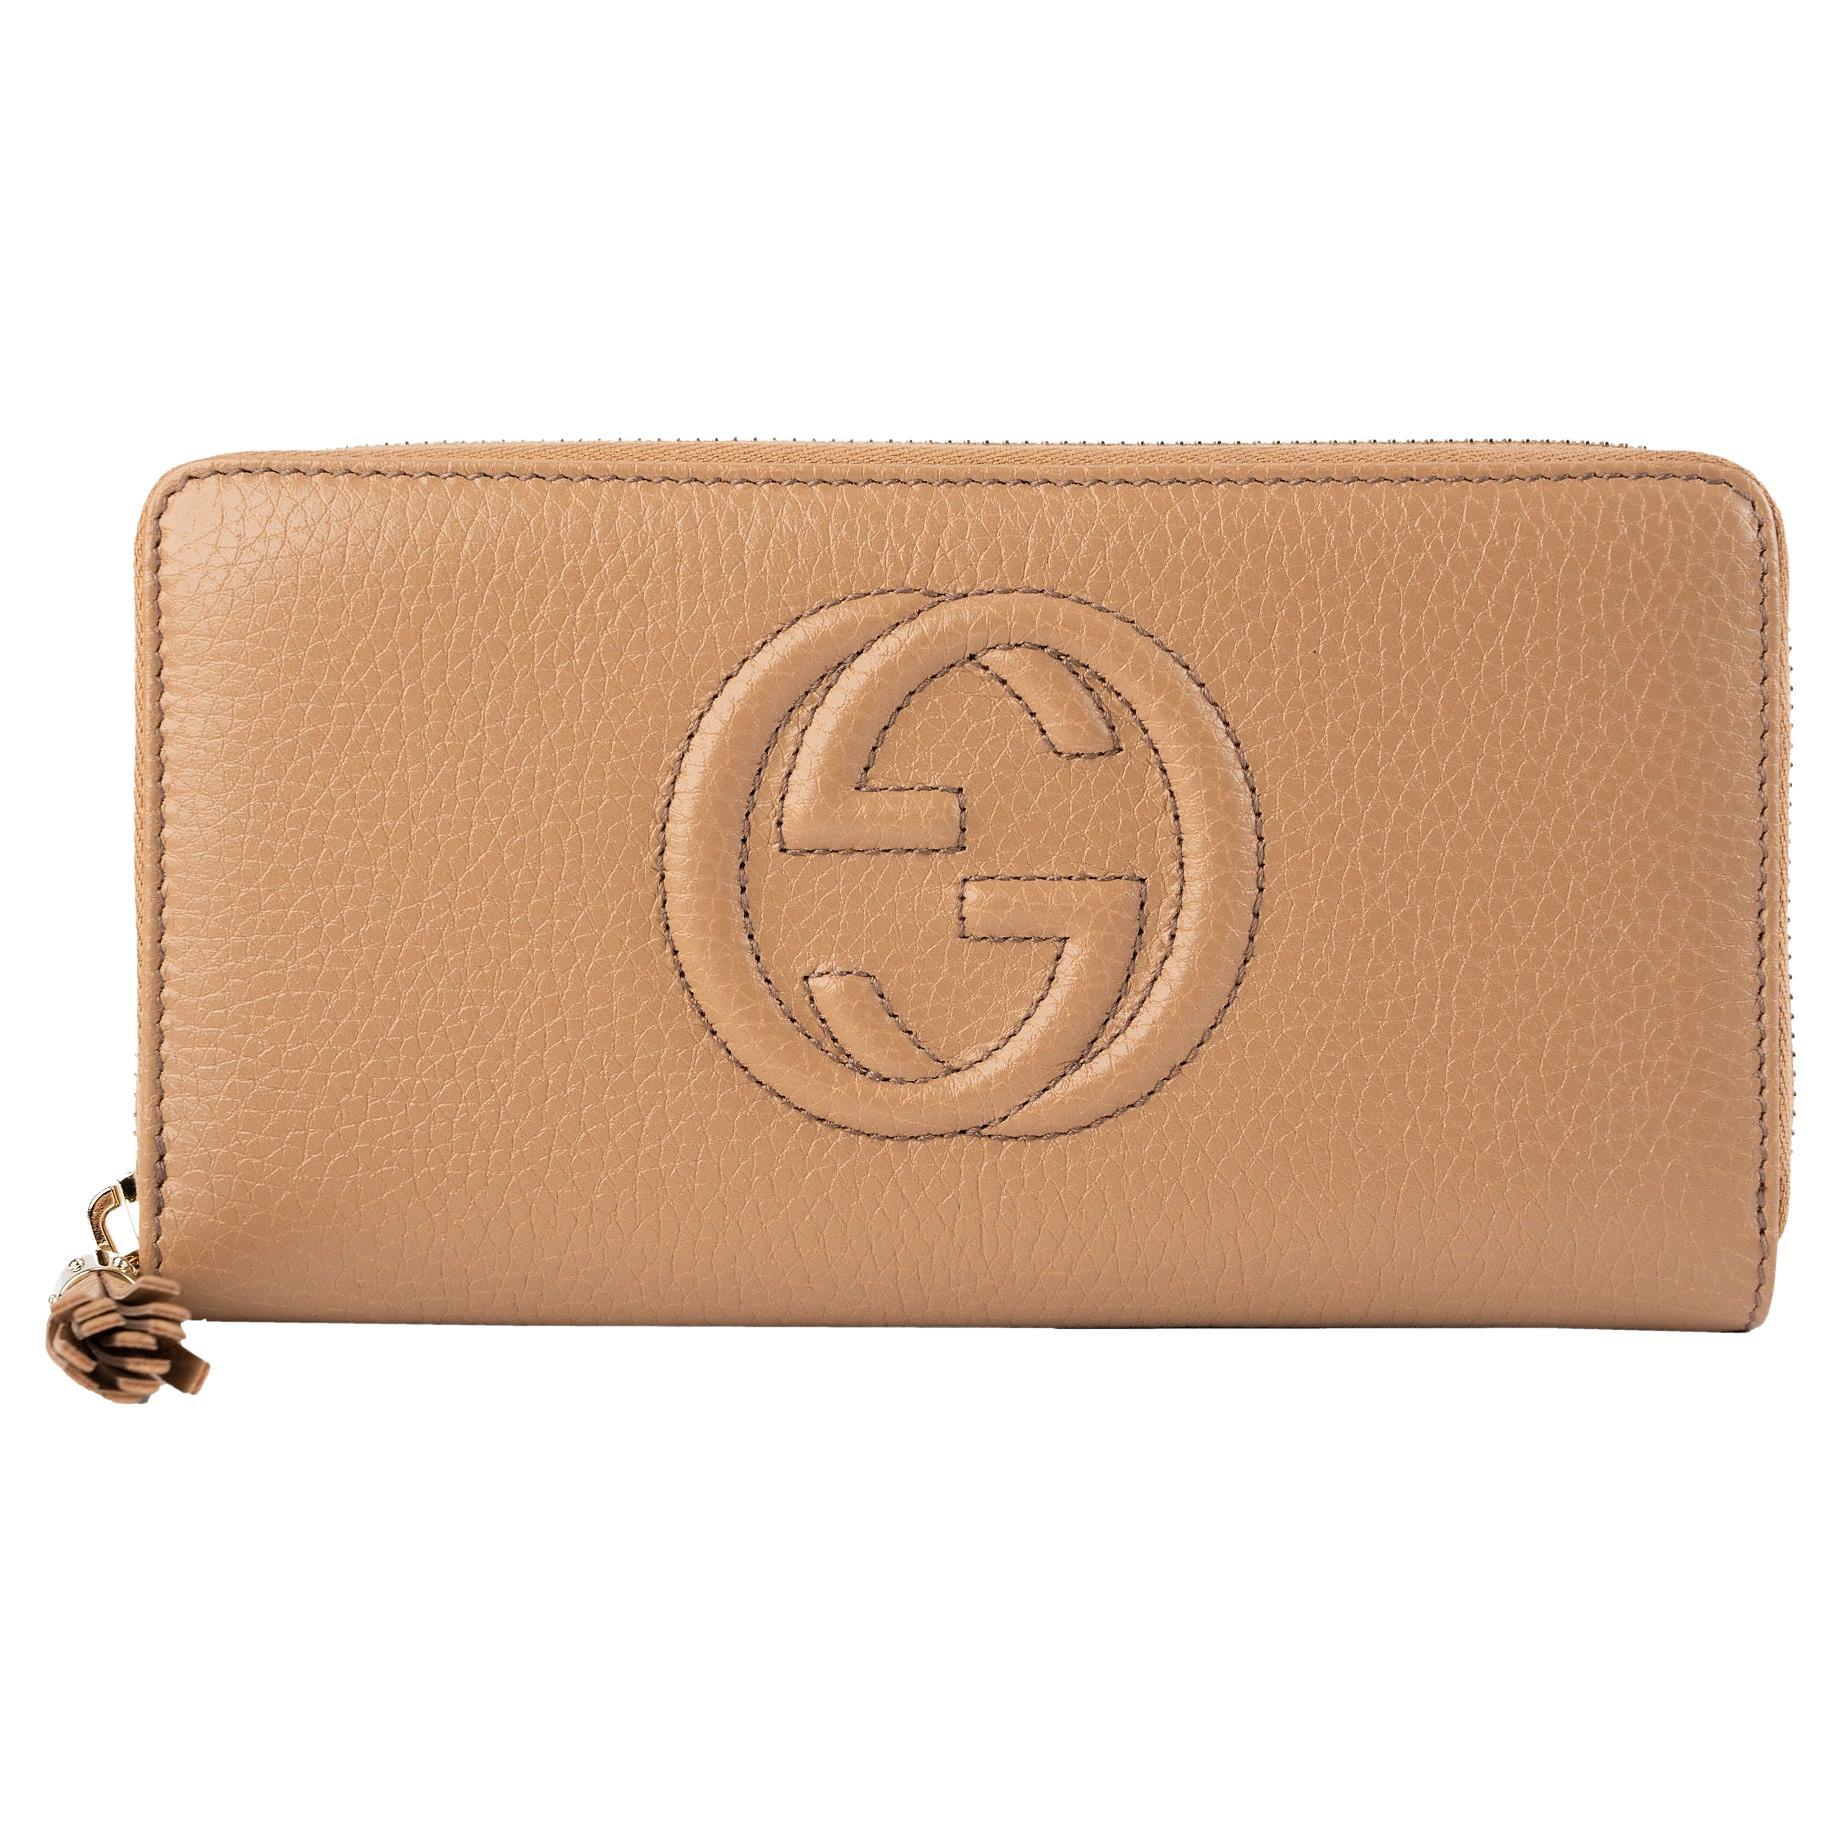 NEW Gucci Beige Soho Leather Zip Around Long Wallet Clutch Bag For Sale